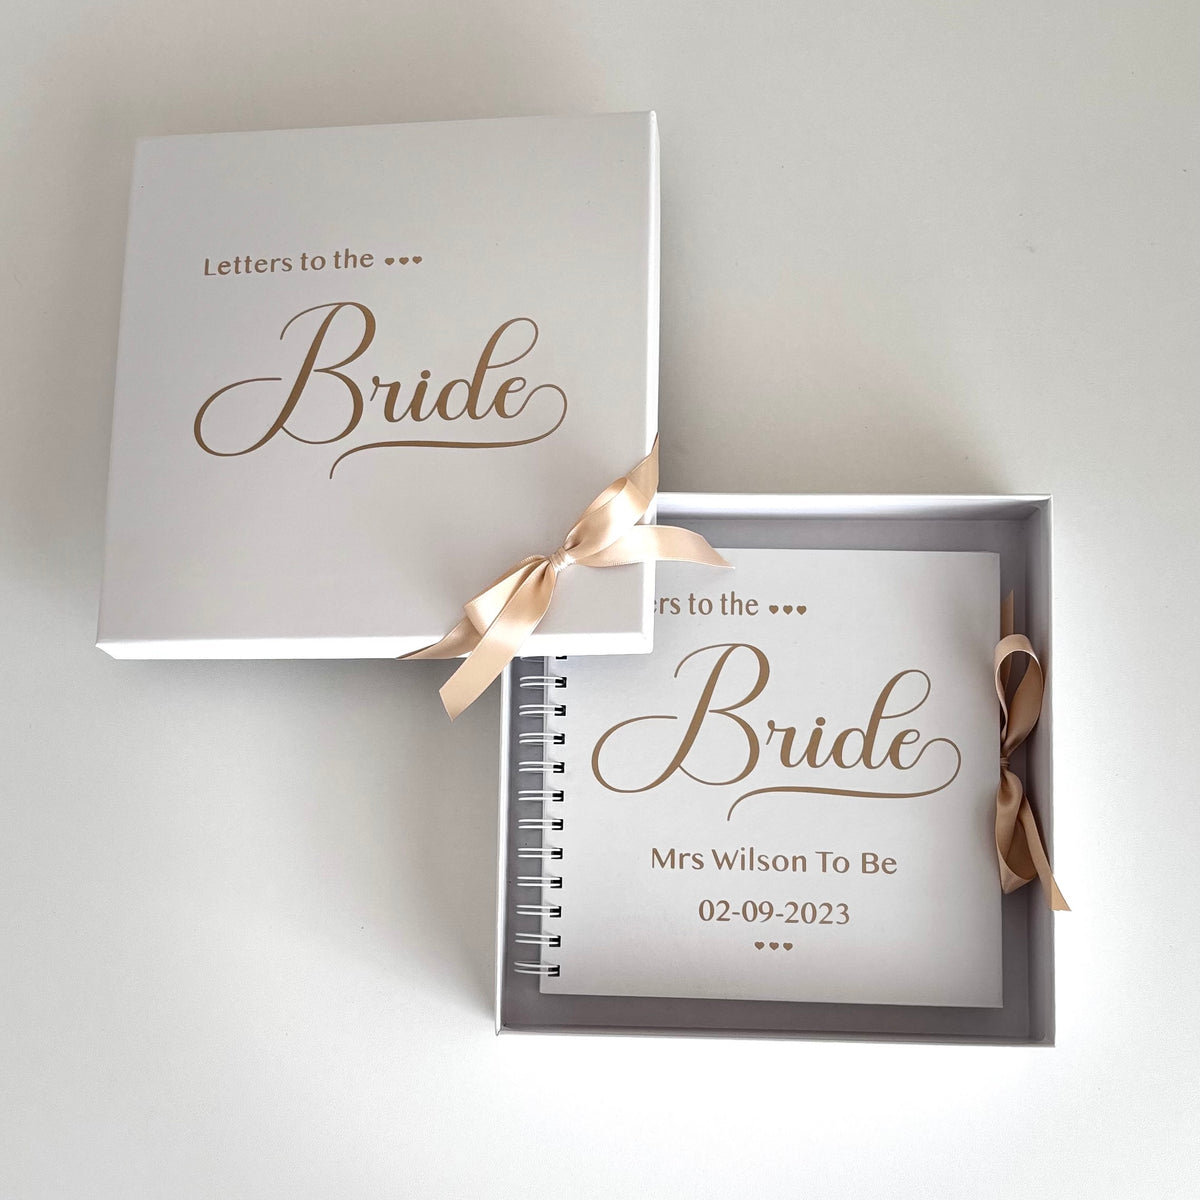 Letters to the bride scrapbook  Bride scrapbook, Letters to the